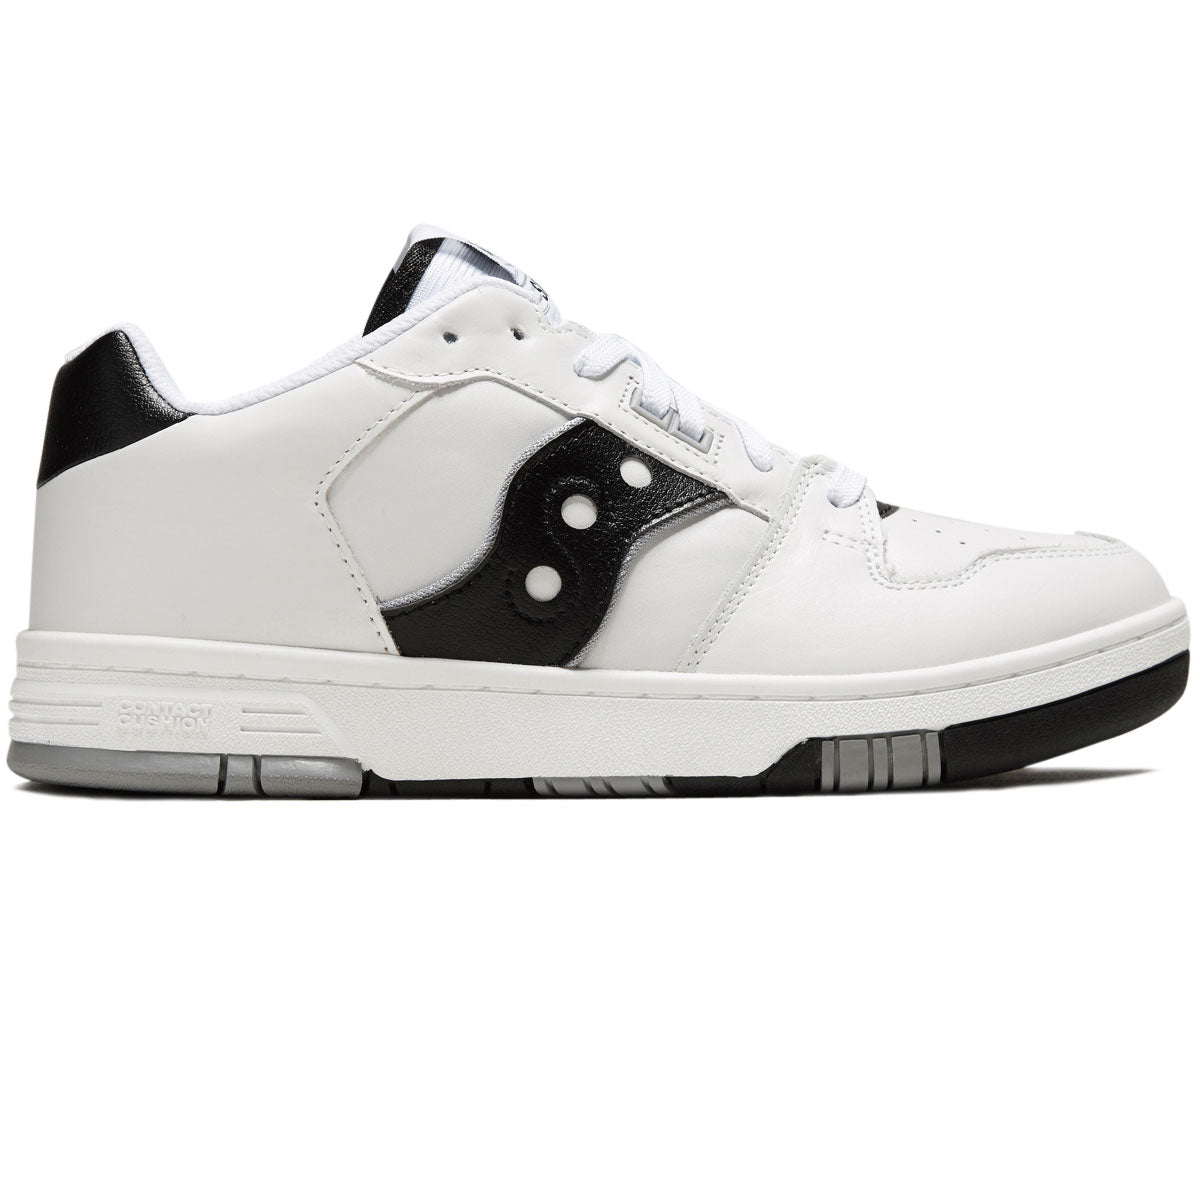 Saucony Sonic Low Shoes - White/Black image 1